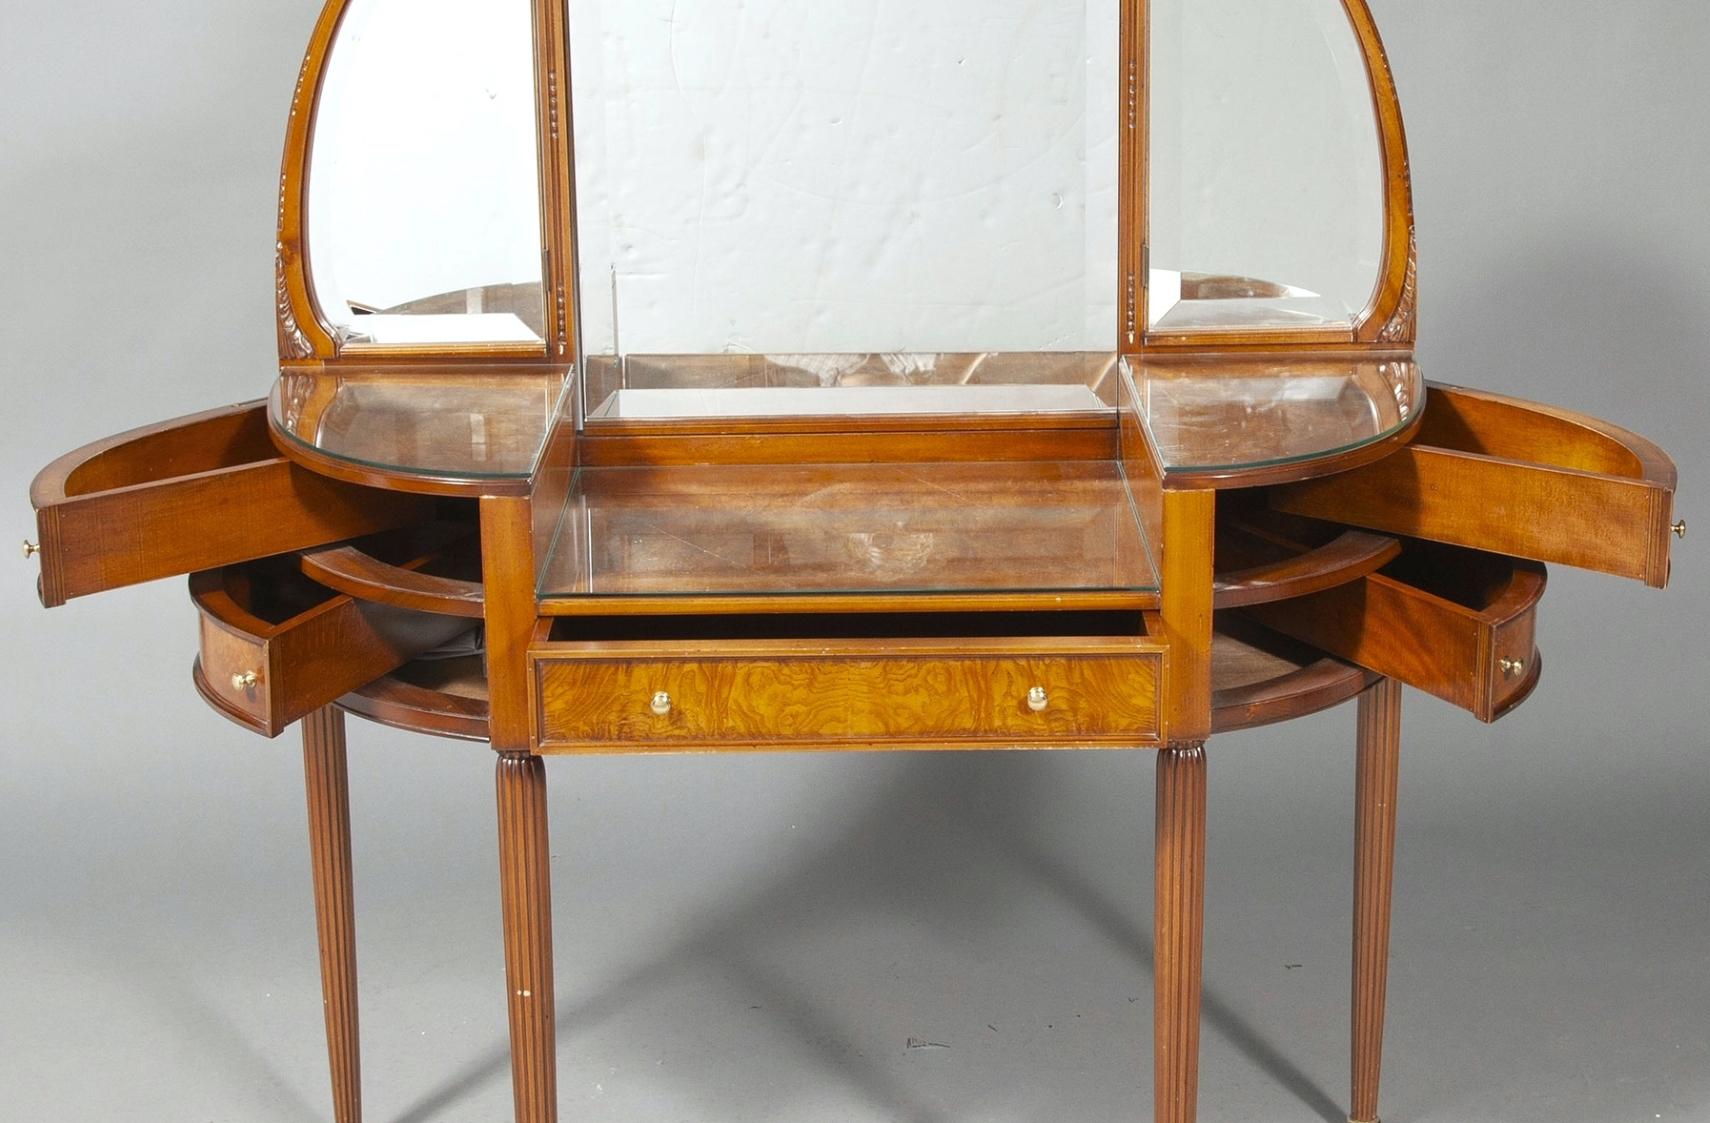 Italian Edwardian Style Walnut Vanity Dressing Table With Chair For Sale 2